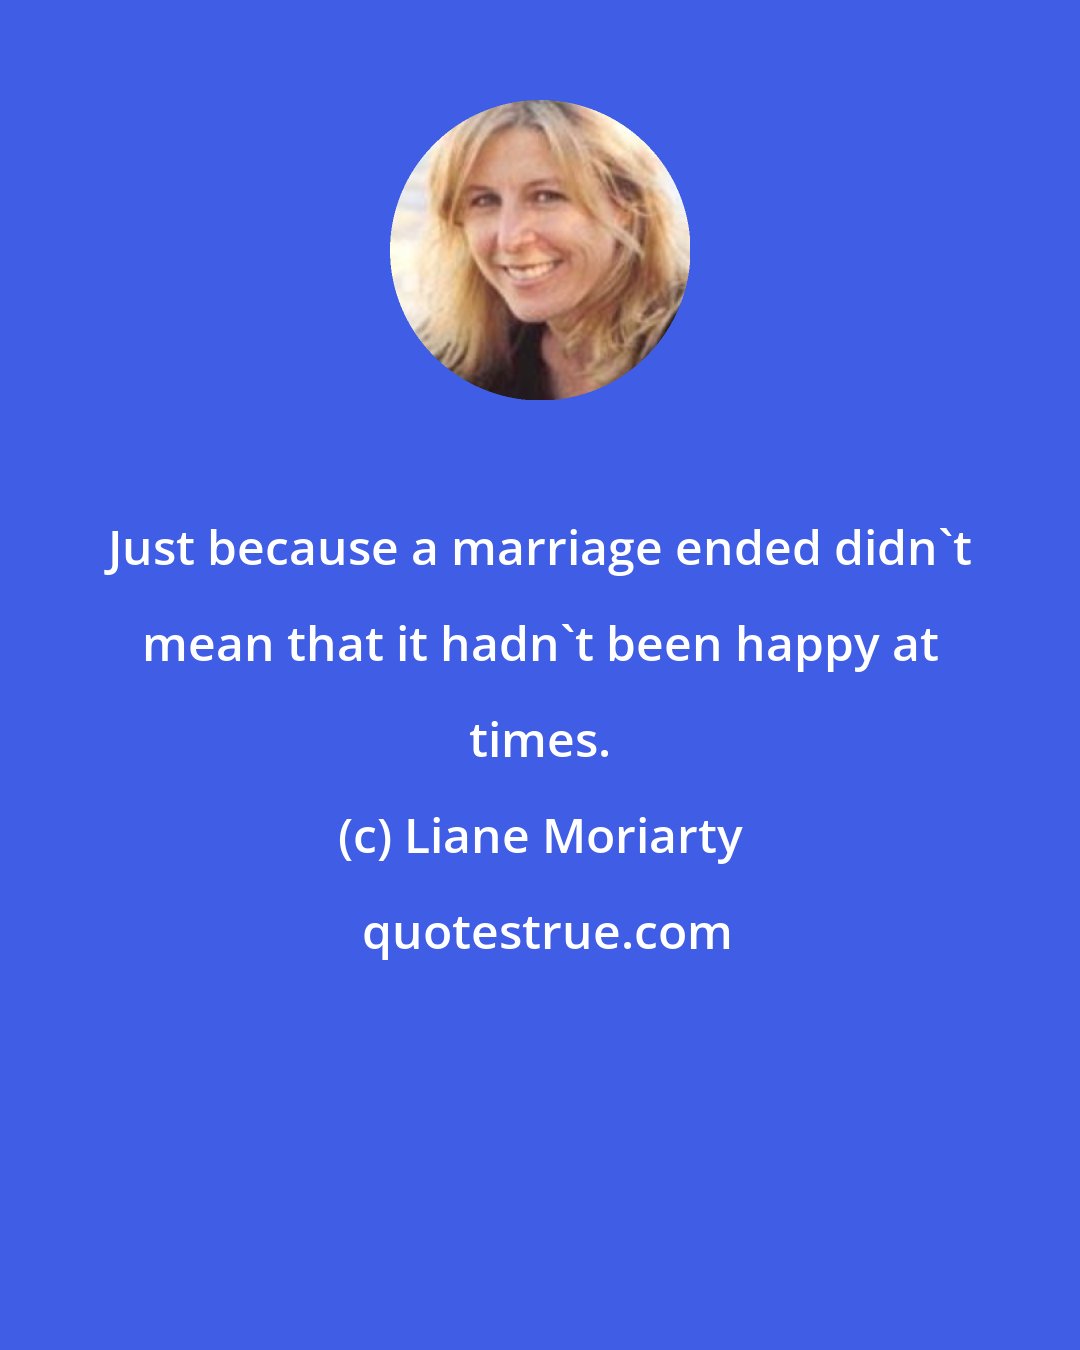 Liane Moriarty: Just because a marriage ended didn't mean that it hadn't been happy at times.